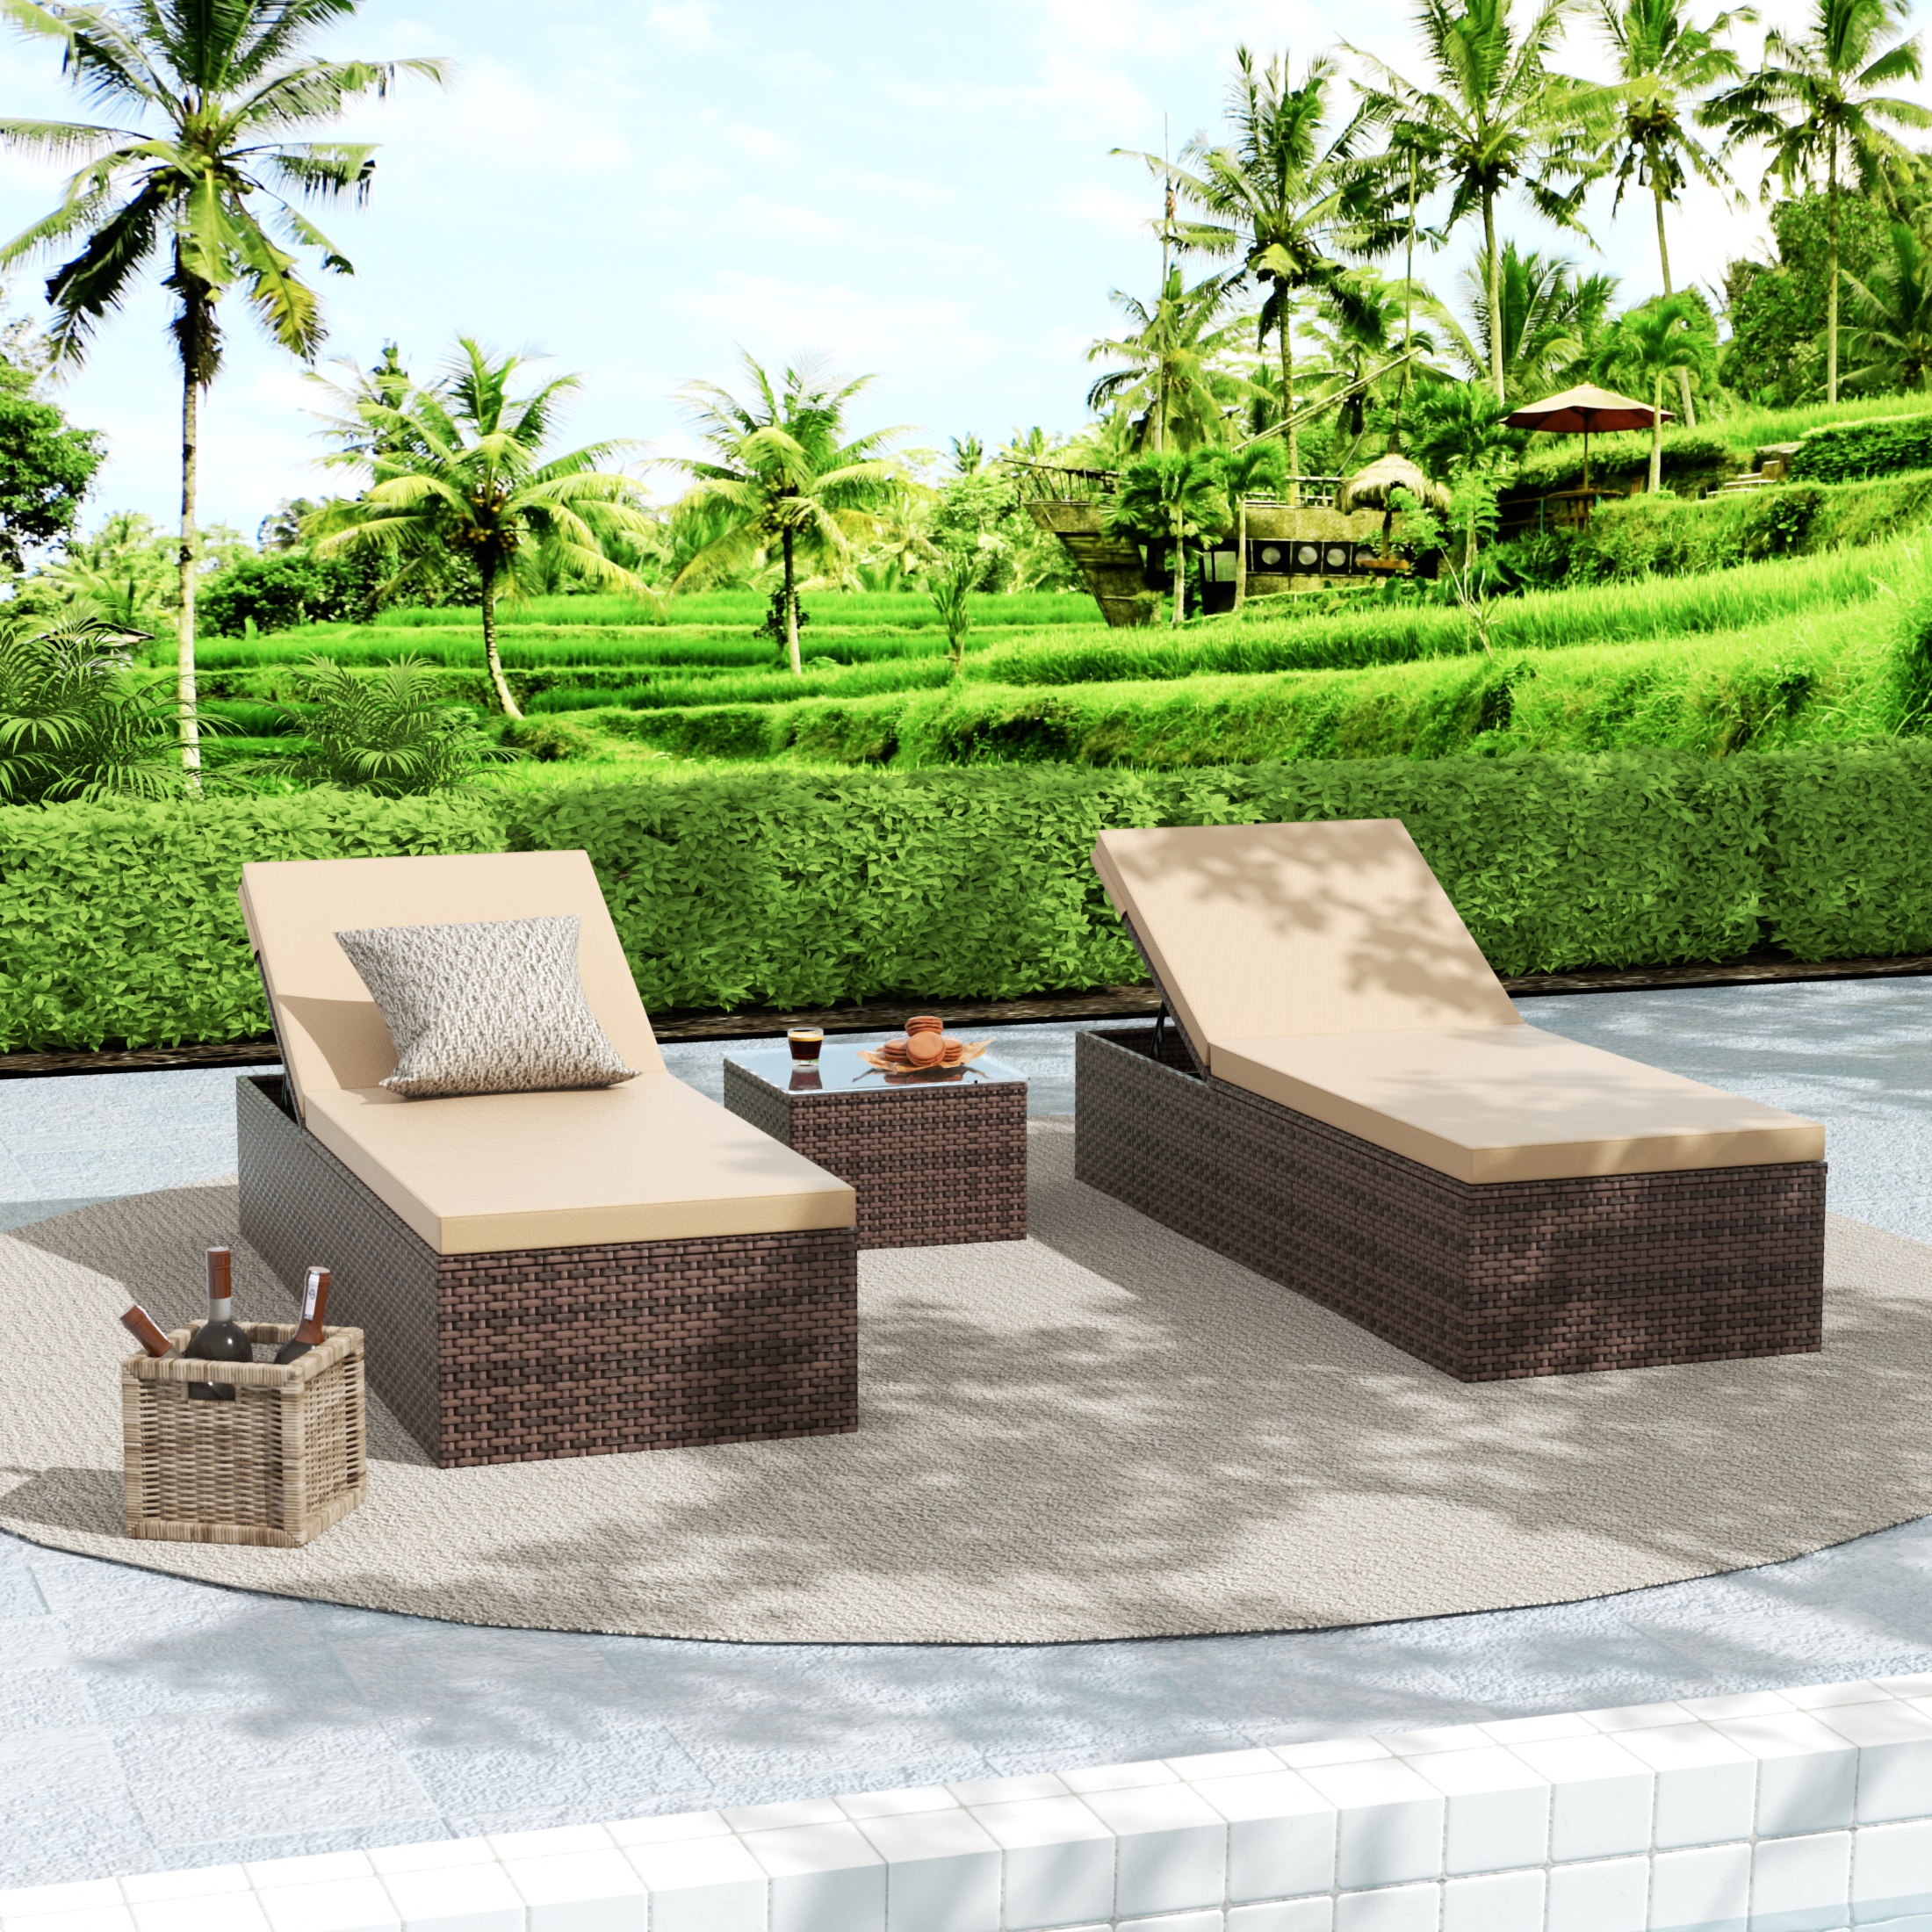 WestinTrends Muriel Wicker Chaise Lounge Outdoor, All Weather 3 Pieces Rattan Patio Pool Lounge Chairs Set of 2 and Tempered Glass Side Table, Beige Cushion - image 2 of 7